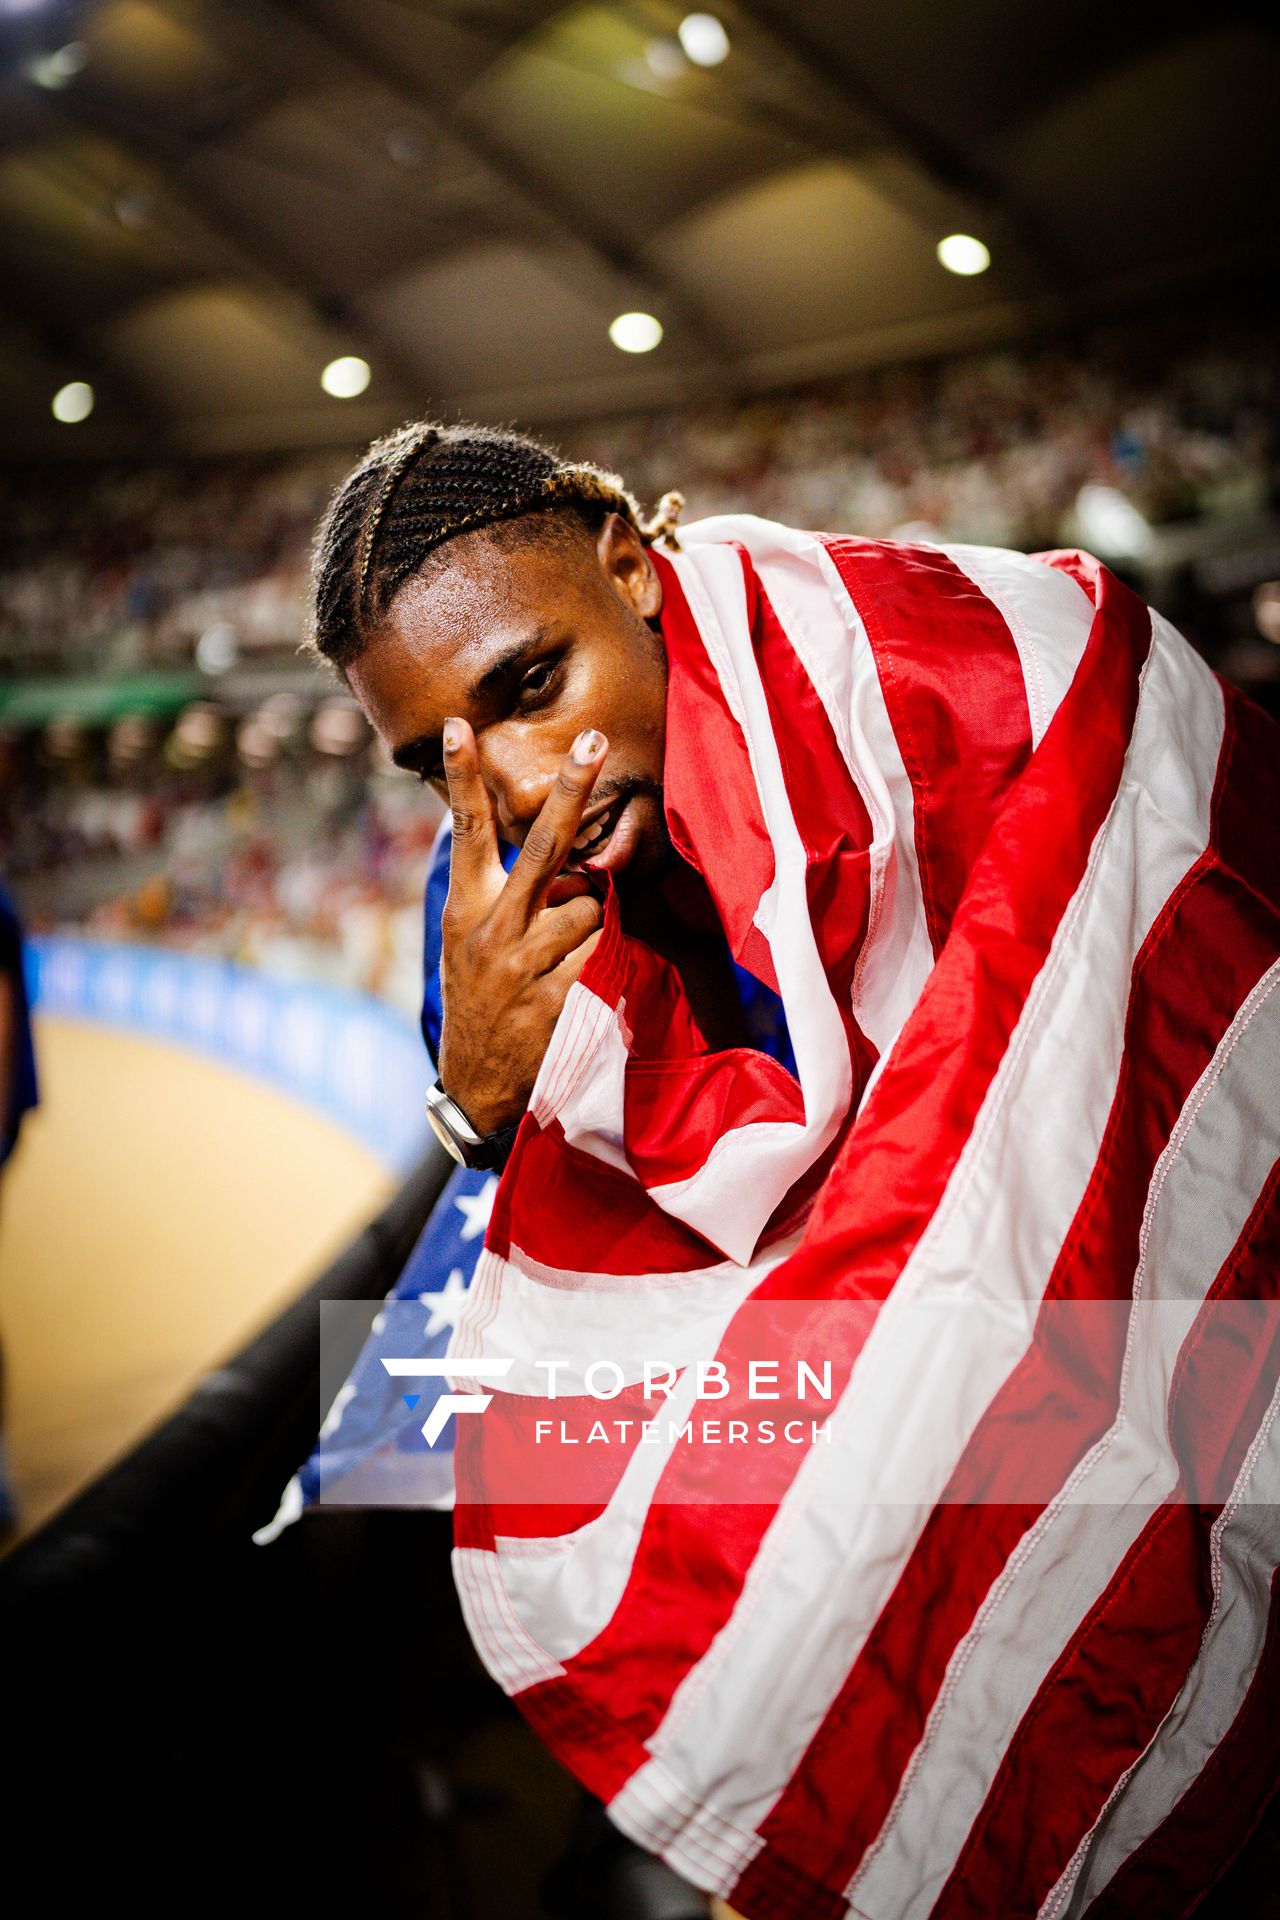 Noah Lyles (USA/United States) during the 200 Metres Final on Day 7 of the World Athletics Championships Budapest 23 at the National Athletics Centre in Budapest, Hungary on August 25, 2023.